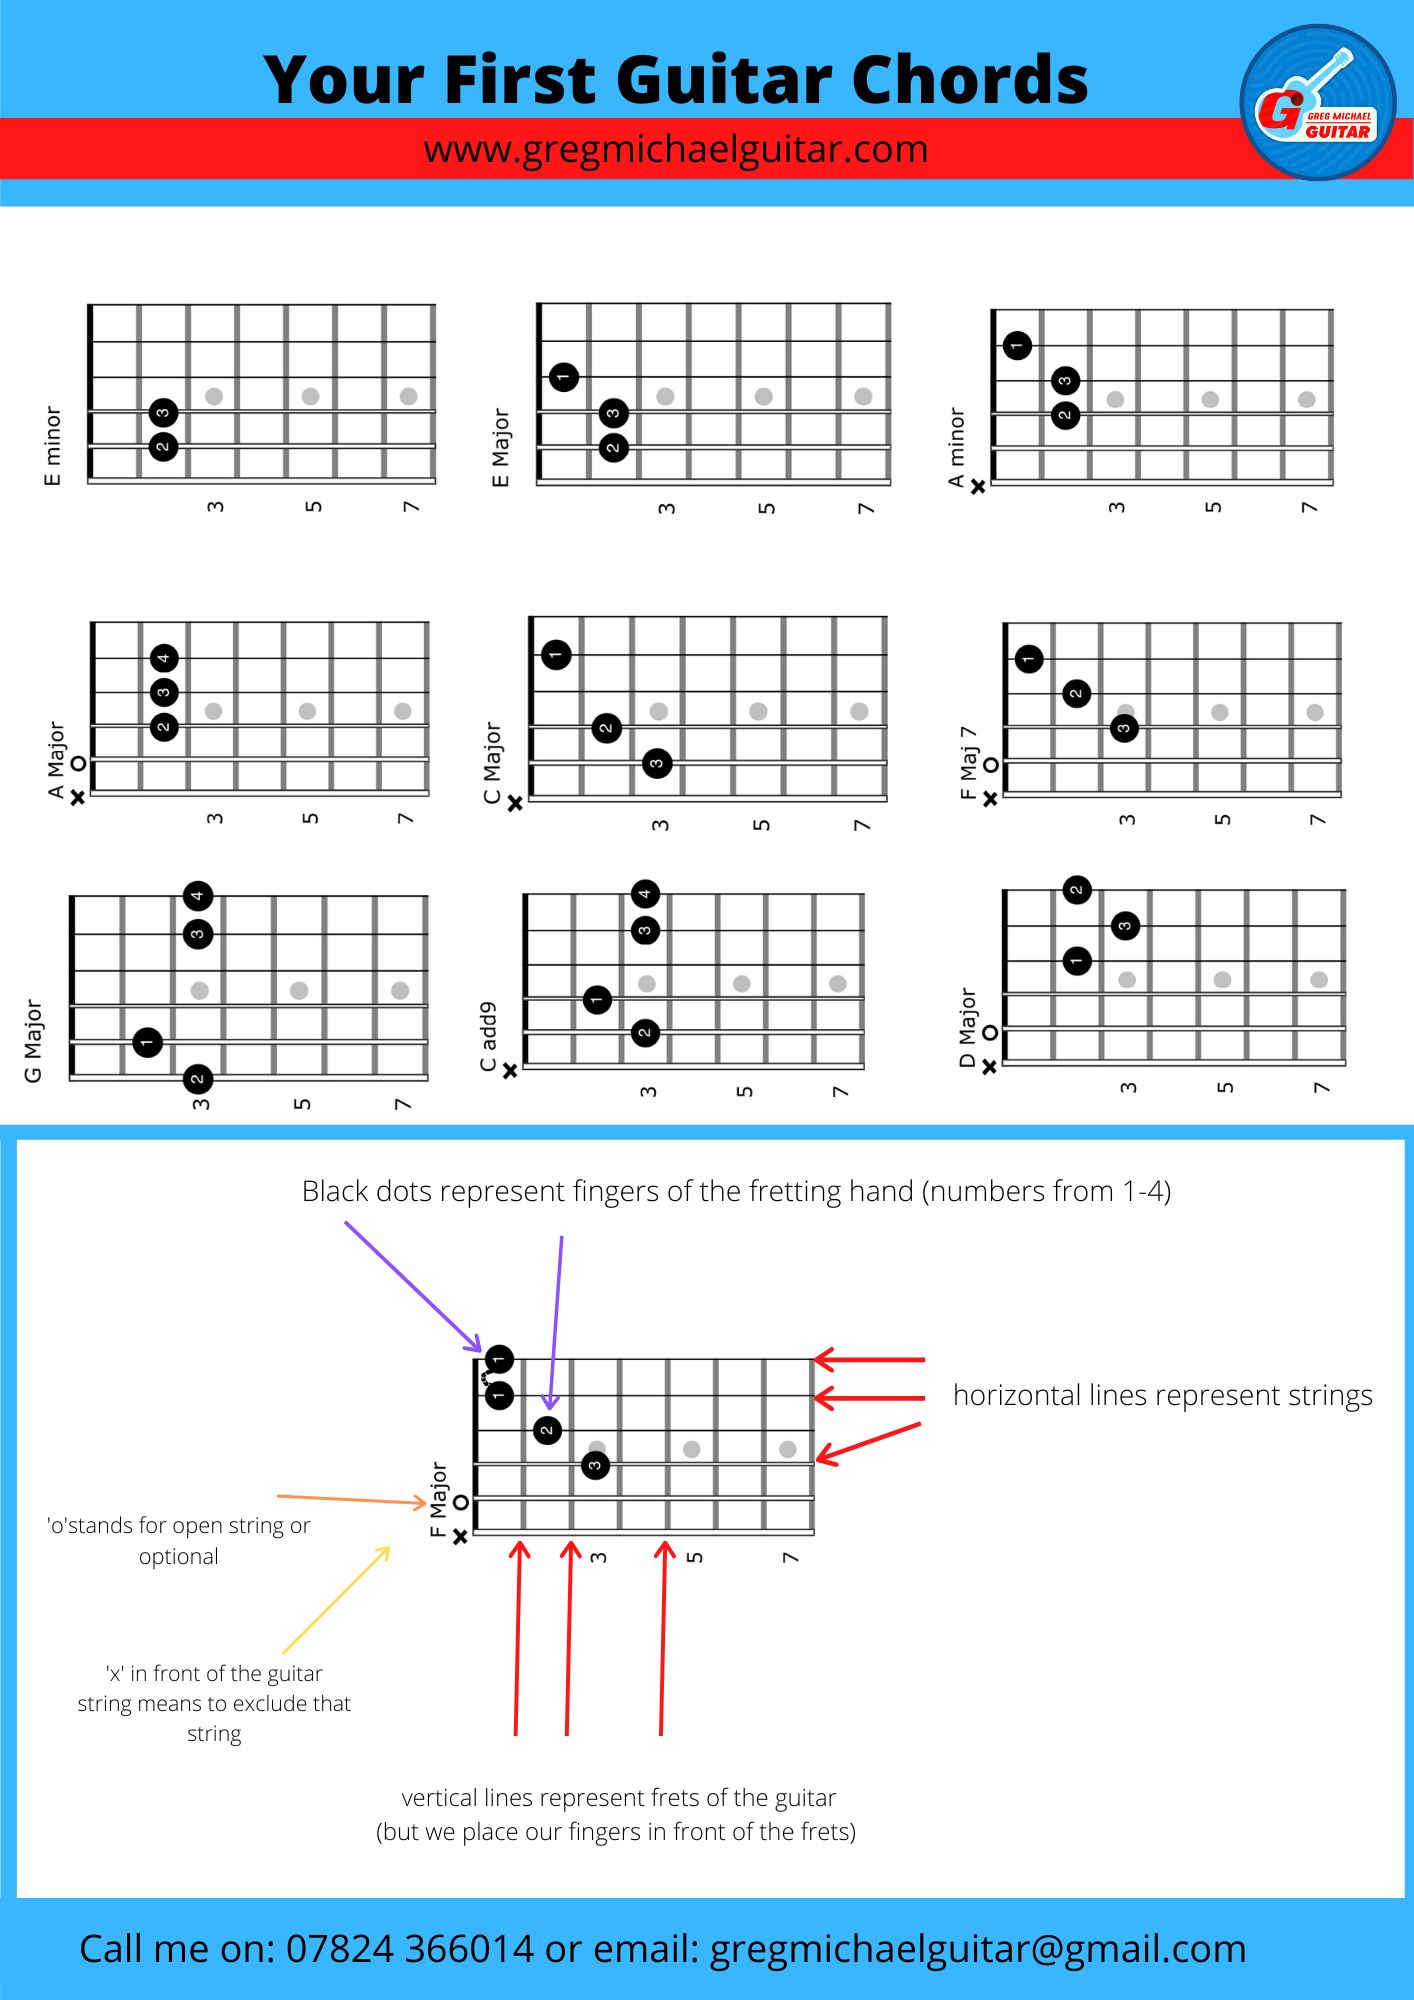 Beginner Guitar Chords with recommended fingerings